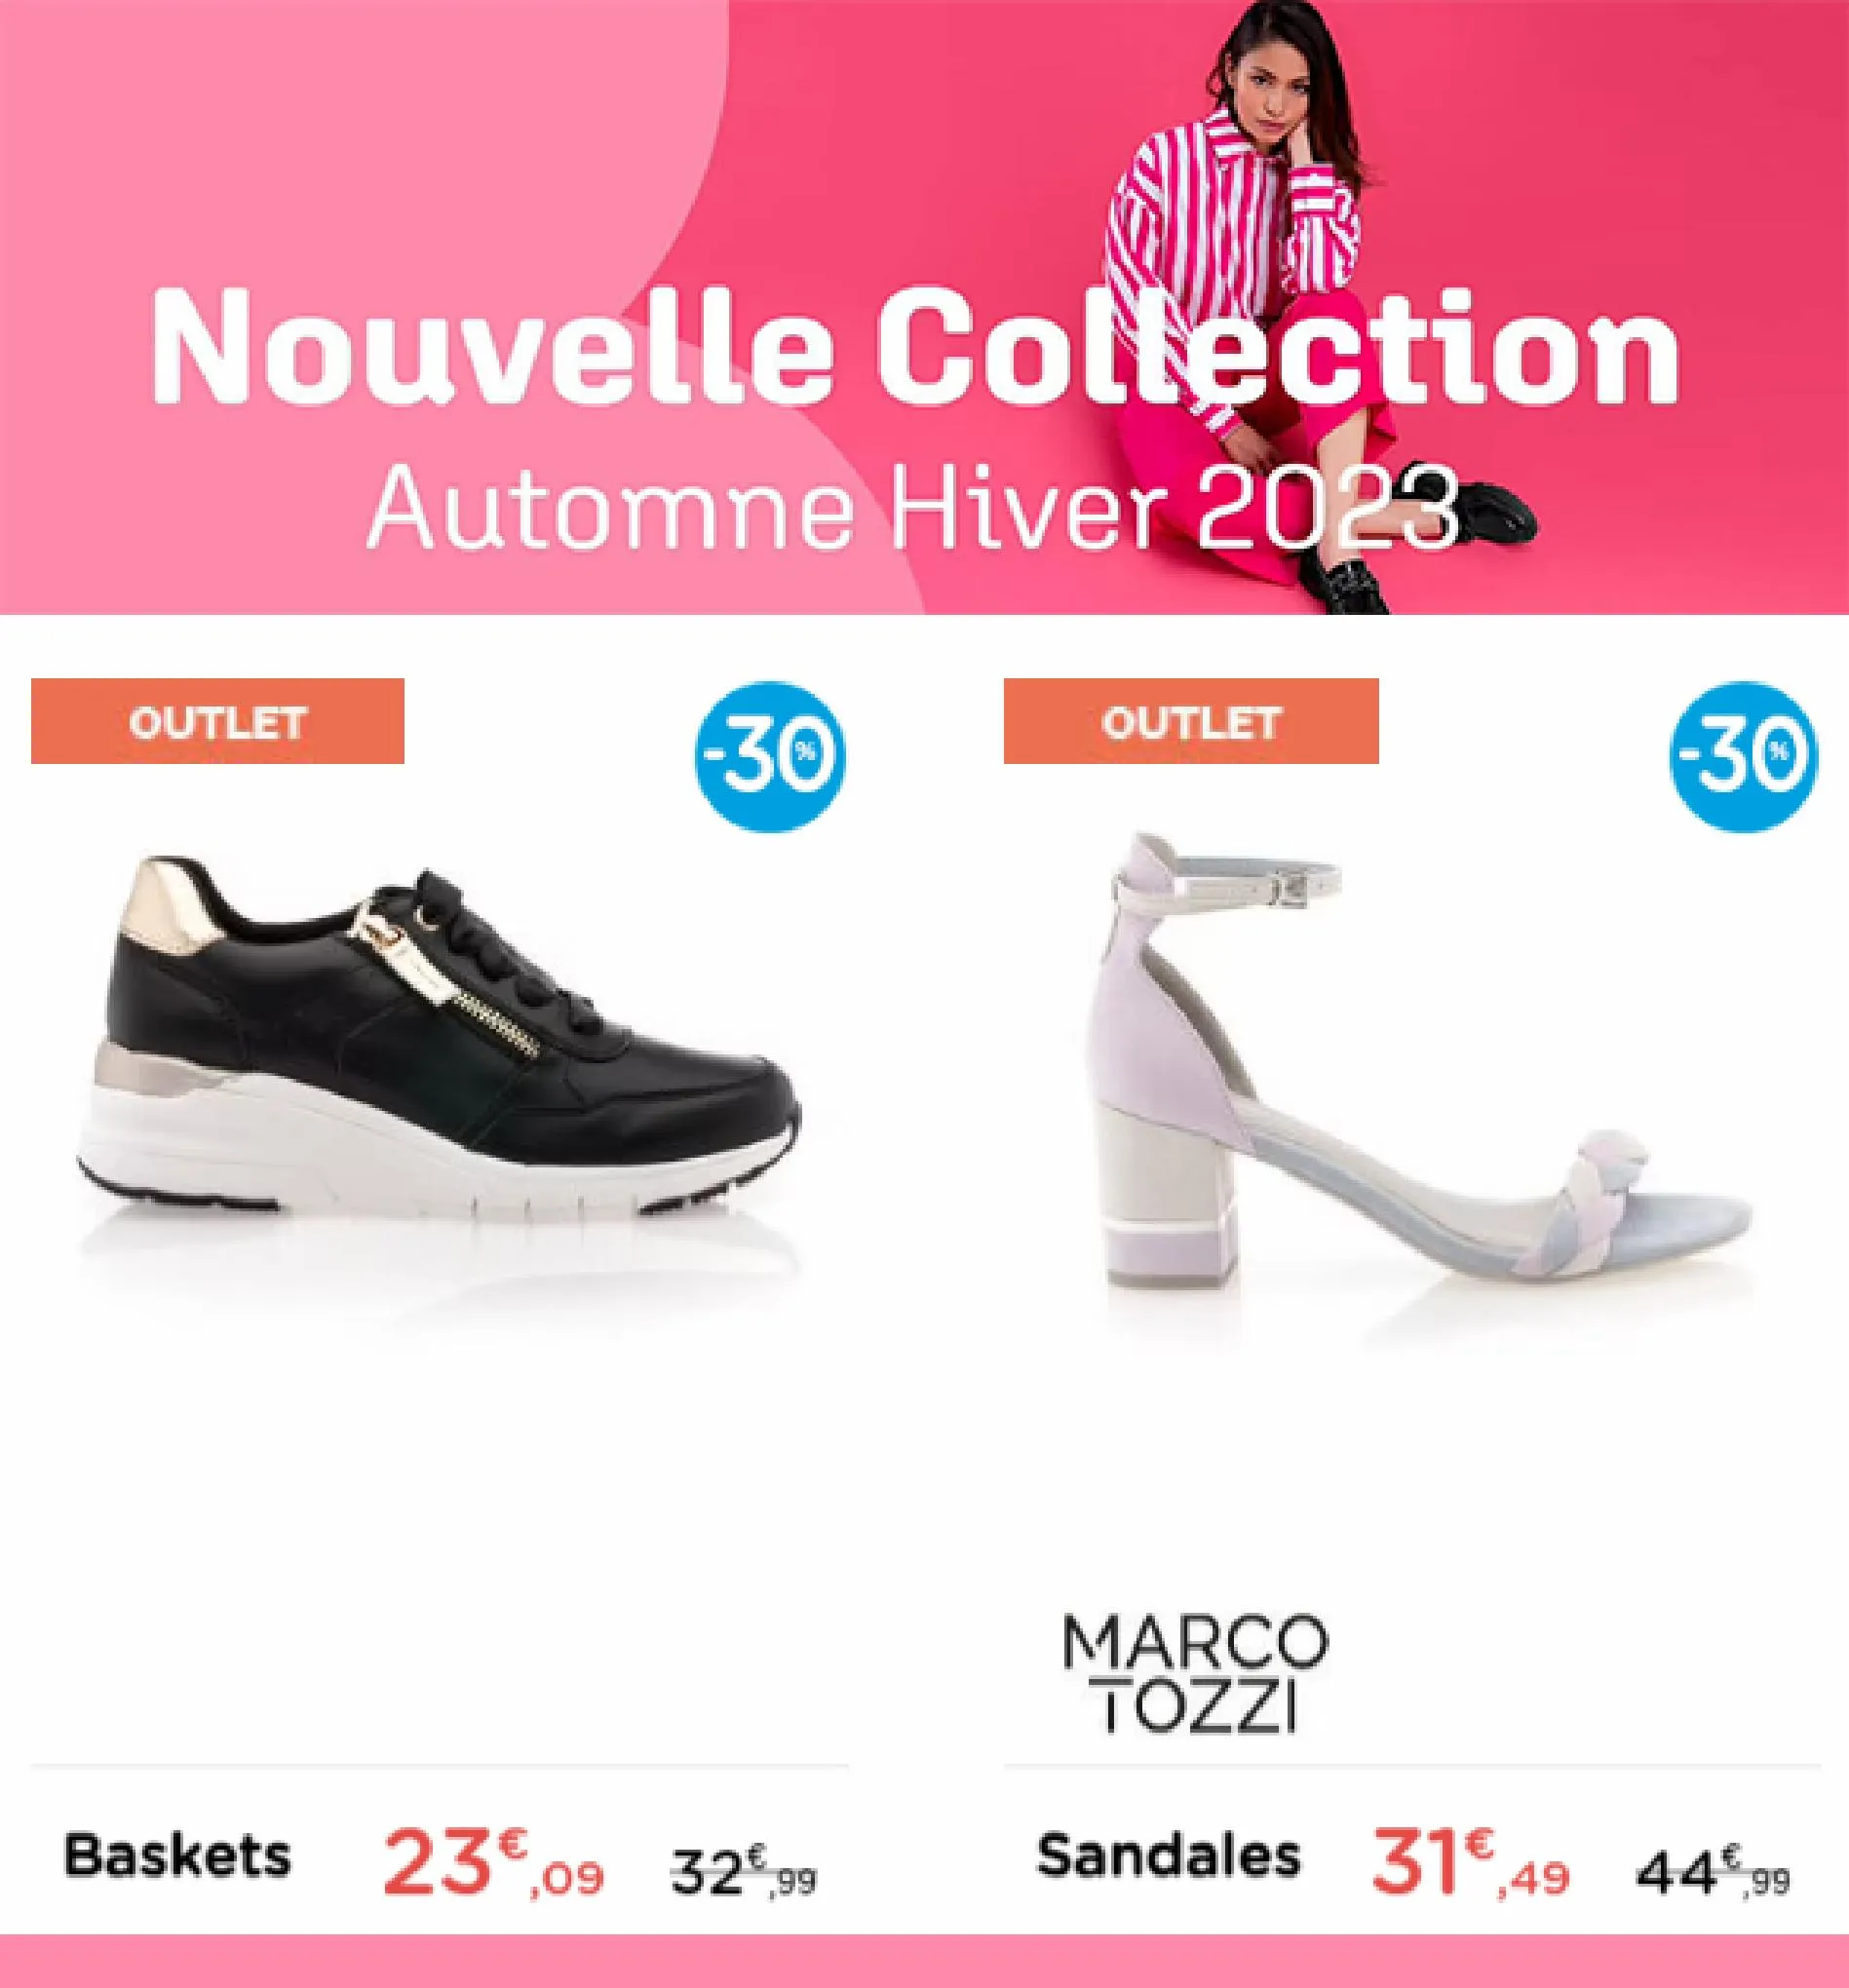 Catalogue Outlet -30% Besson, page 00005